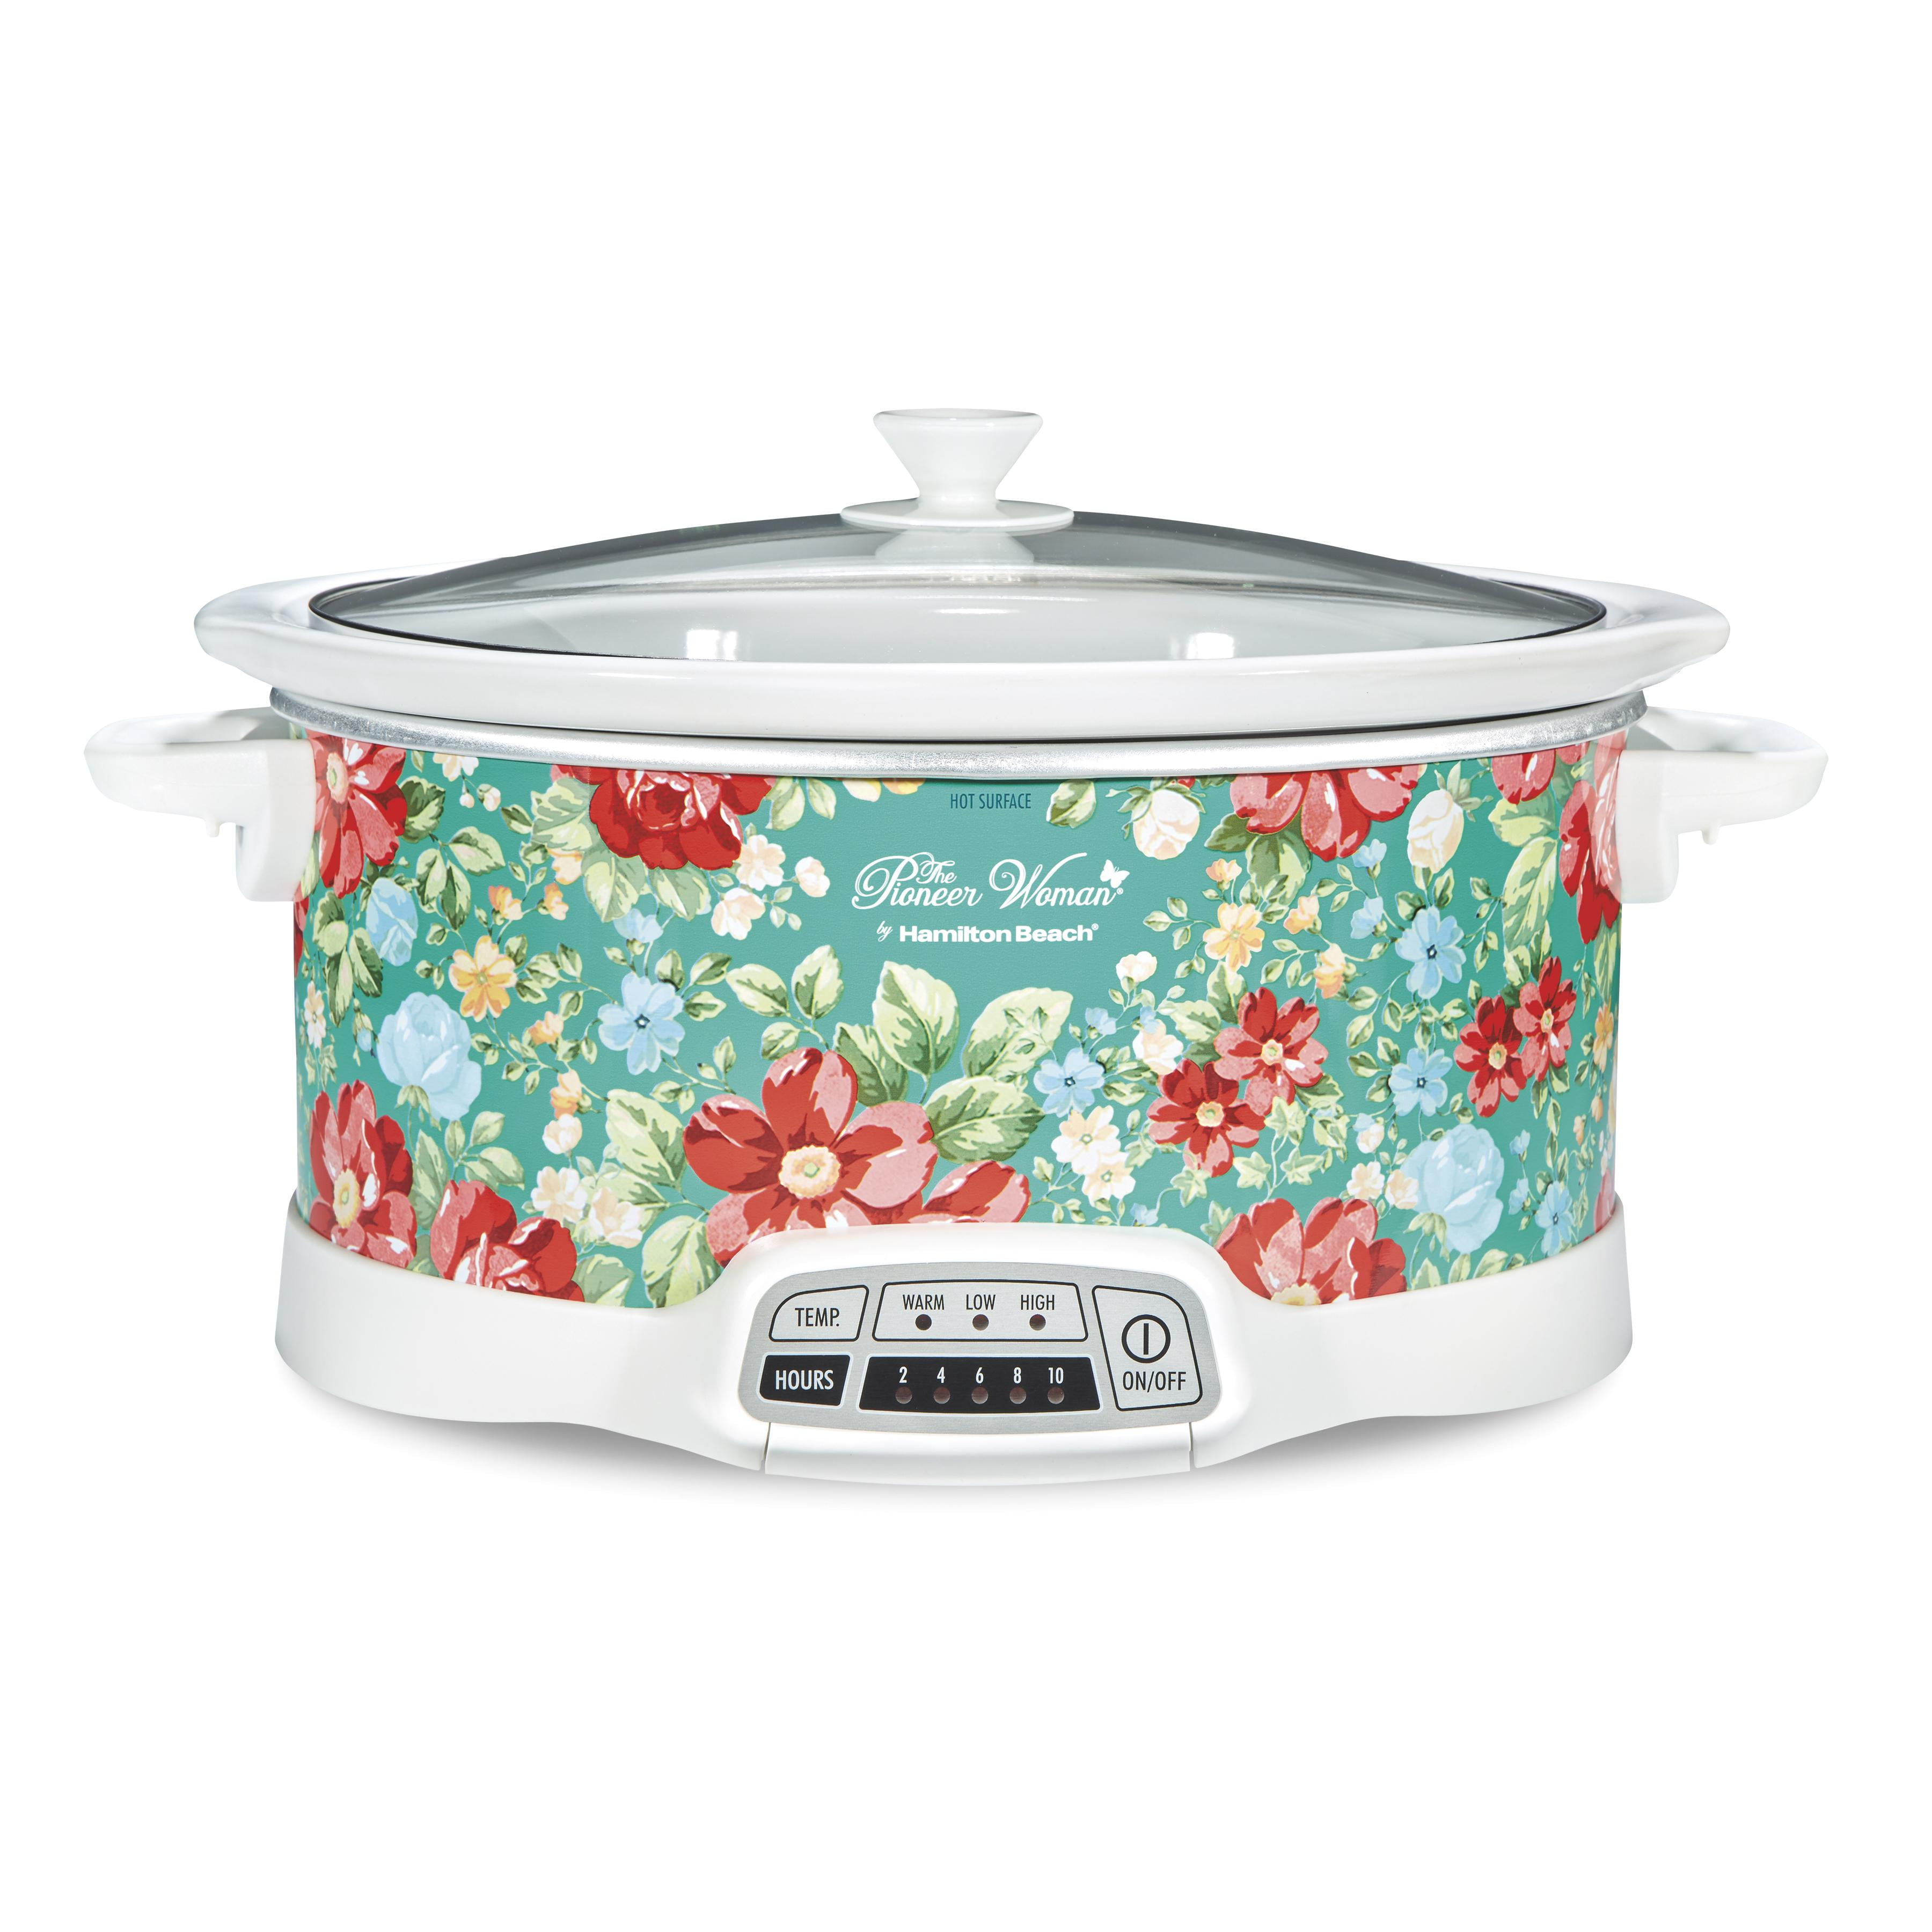 Nordic 3.7 qt. Slow Cooker - Grey SF17021GRYN - The Home Depot